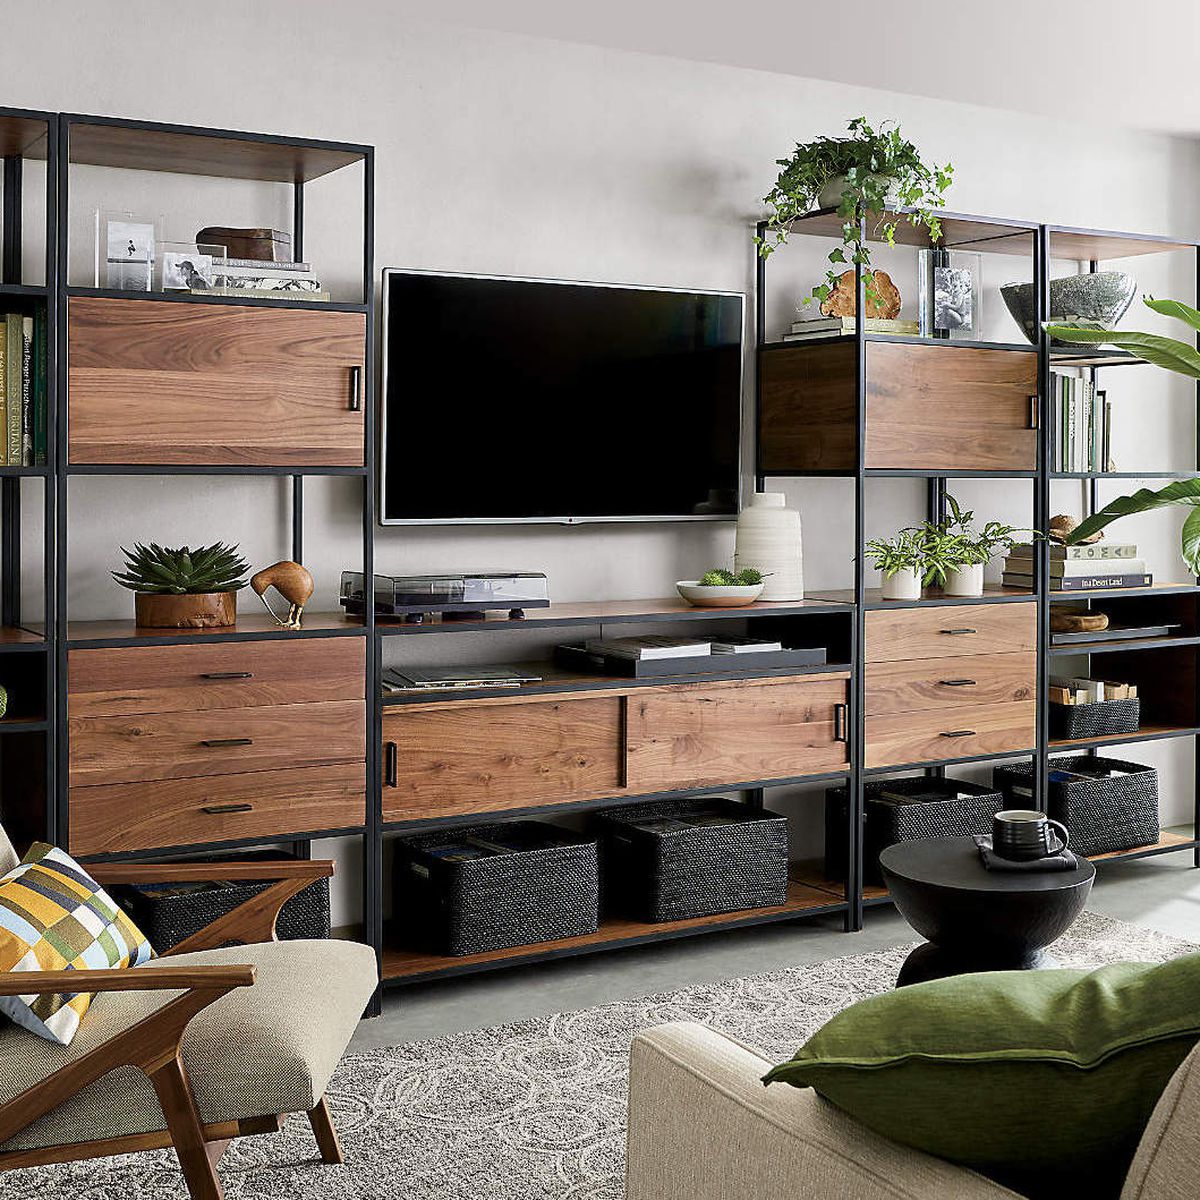 Modular furniture tv in the middle